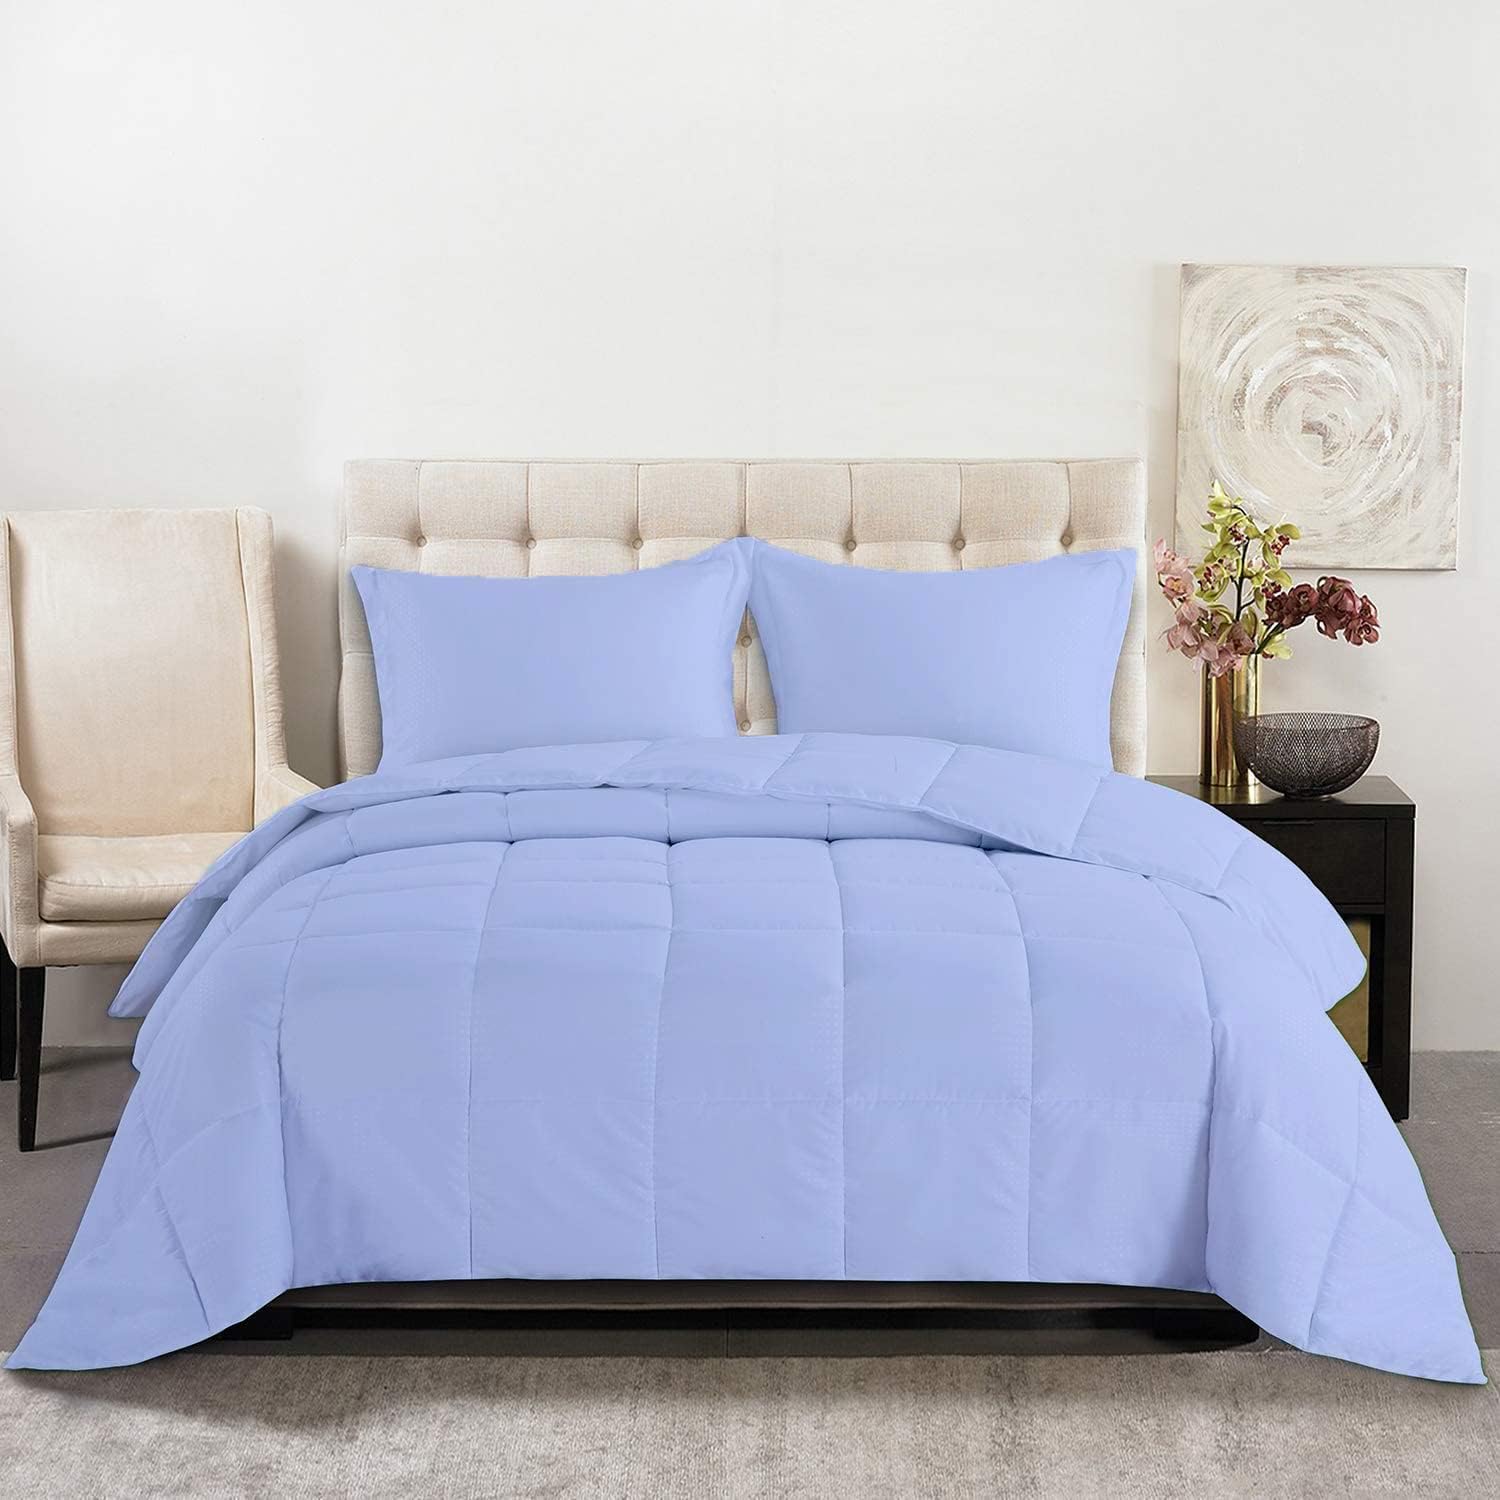 Cotton comforter blue at egyptian linens